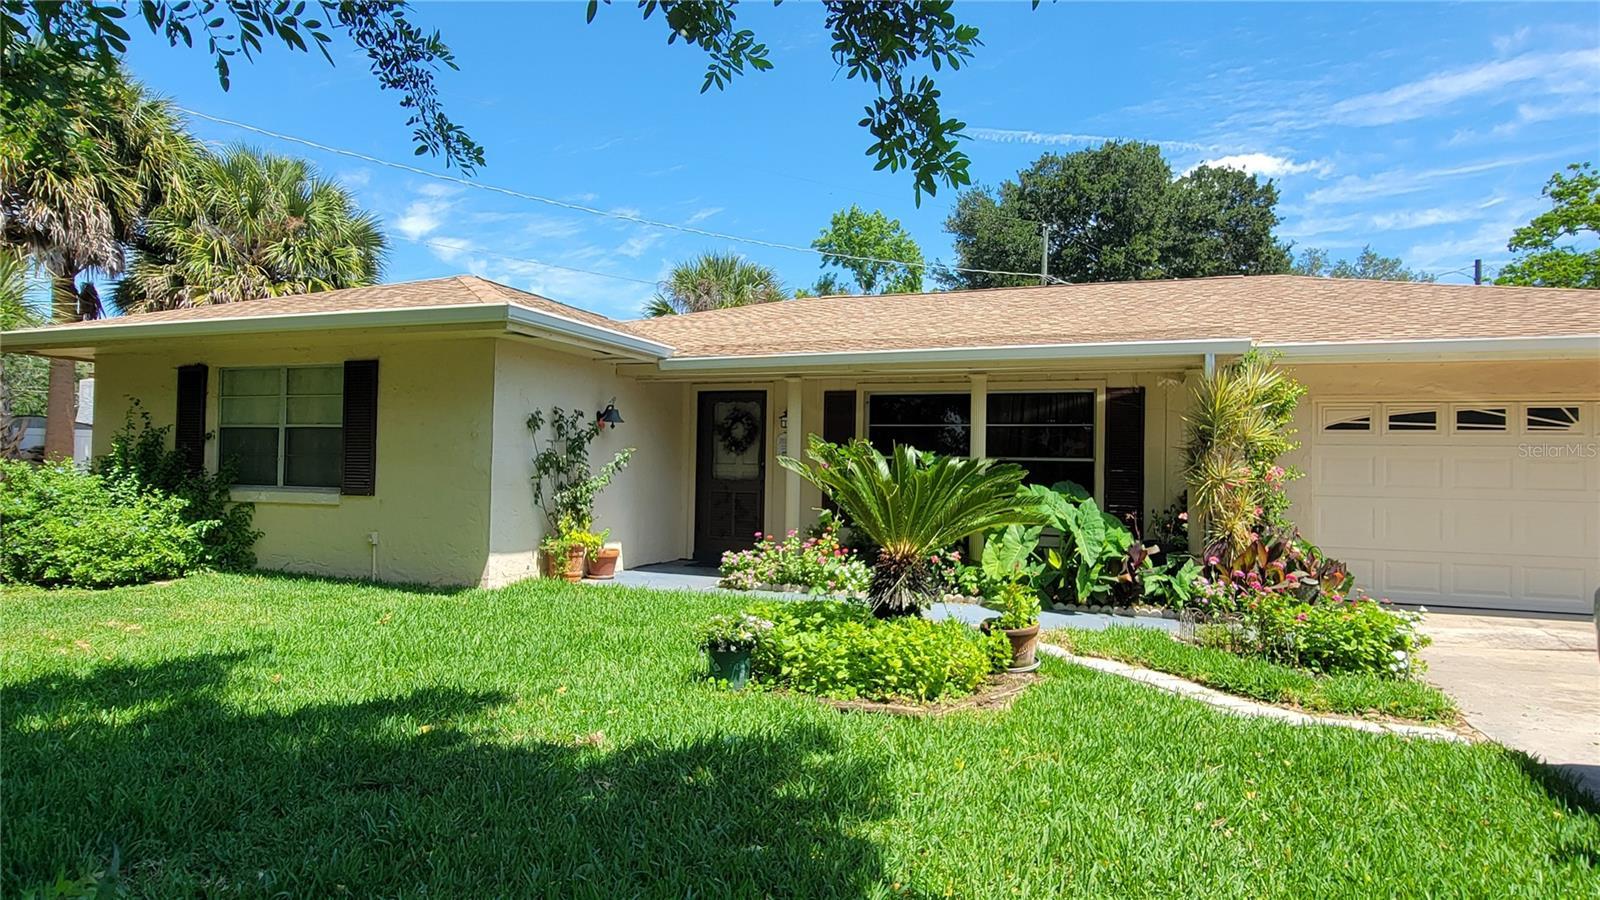 Photo one of 311 Saint Lucie Rd Winter Haven FL 33884 | MLS P4928751